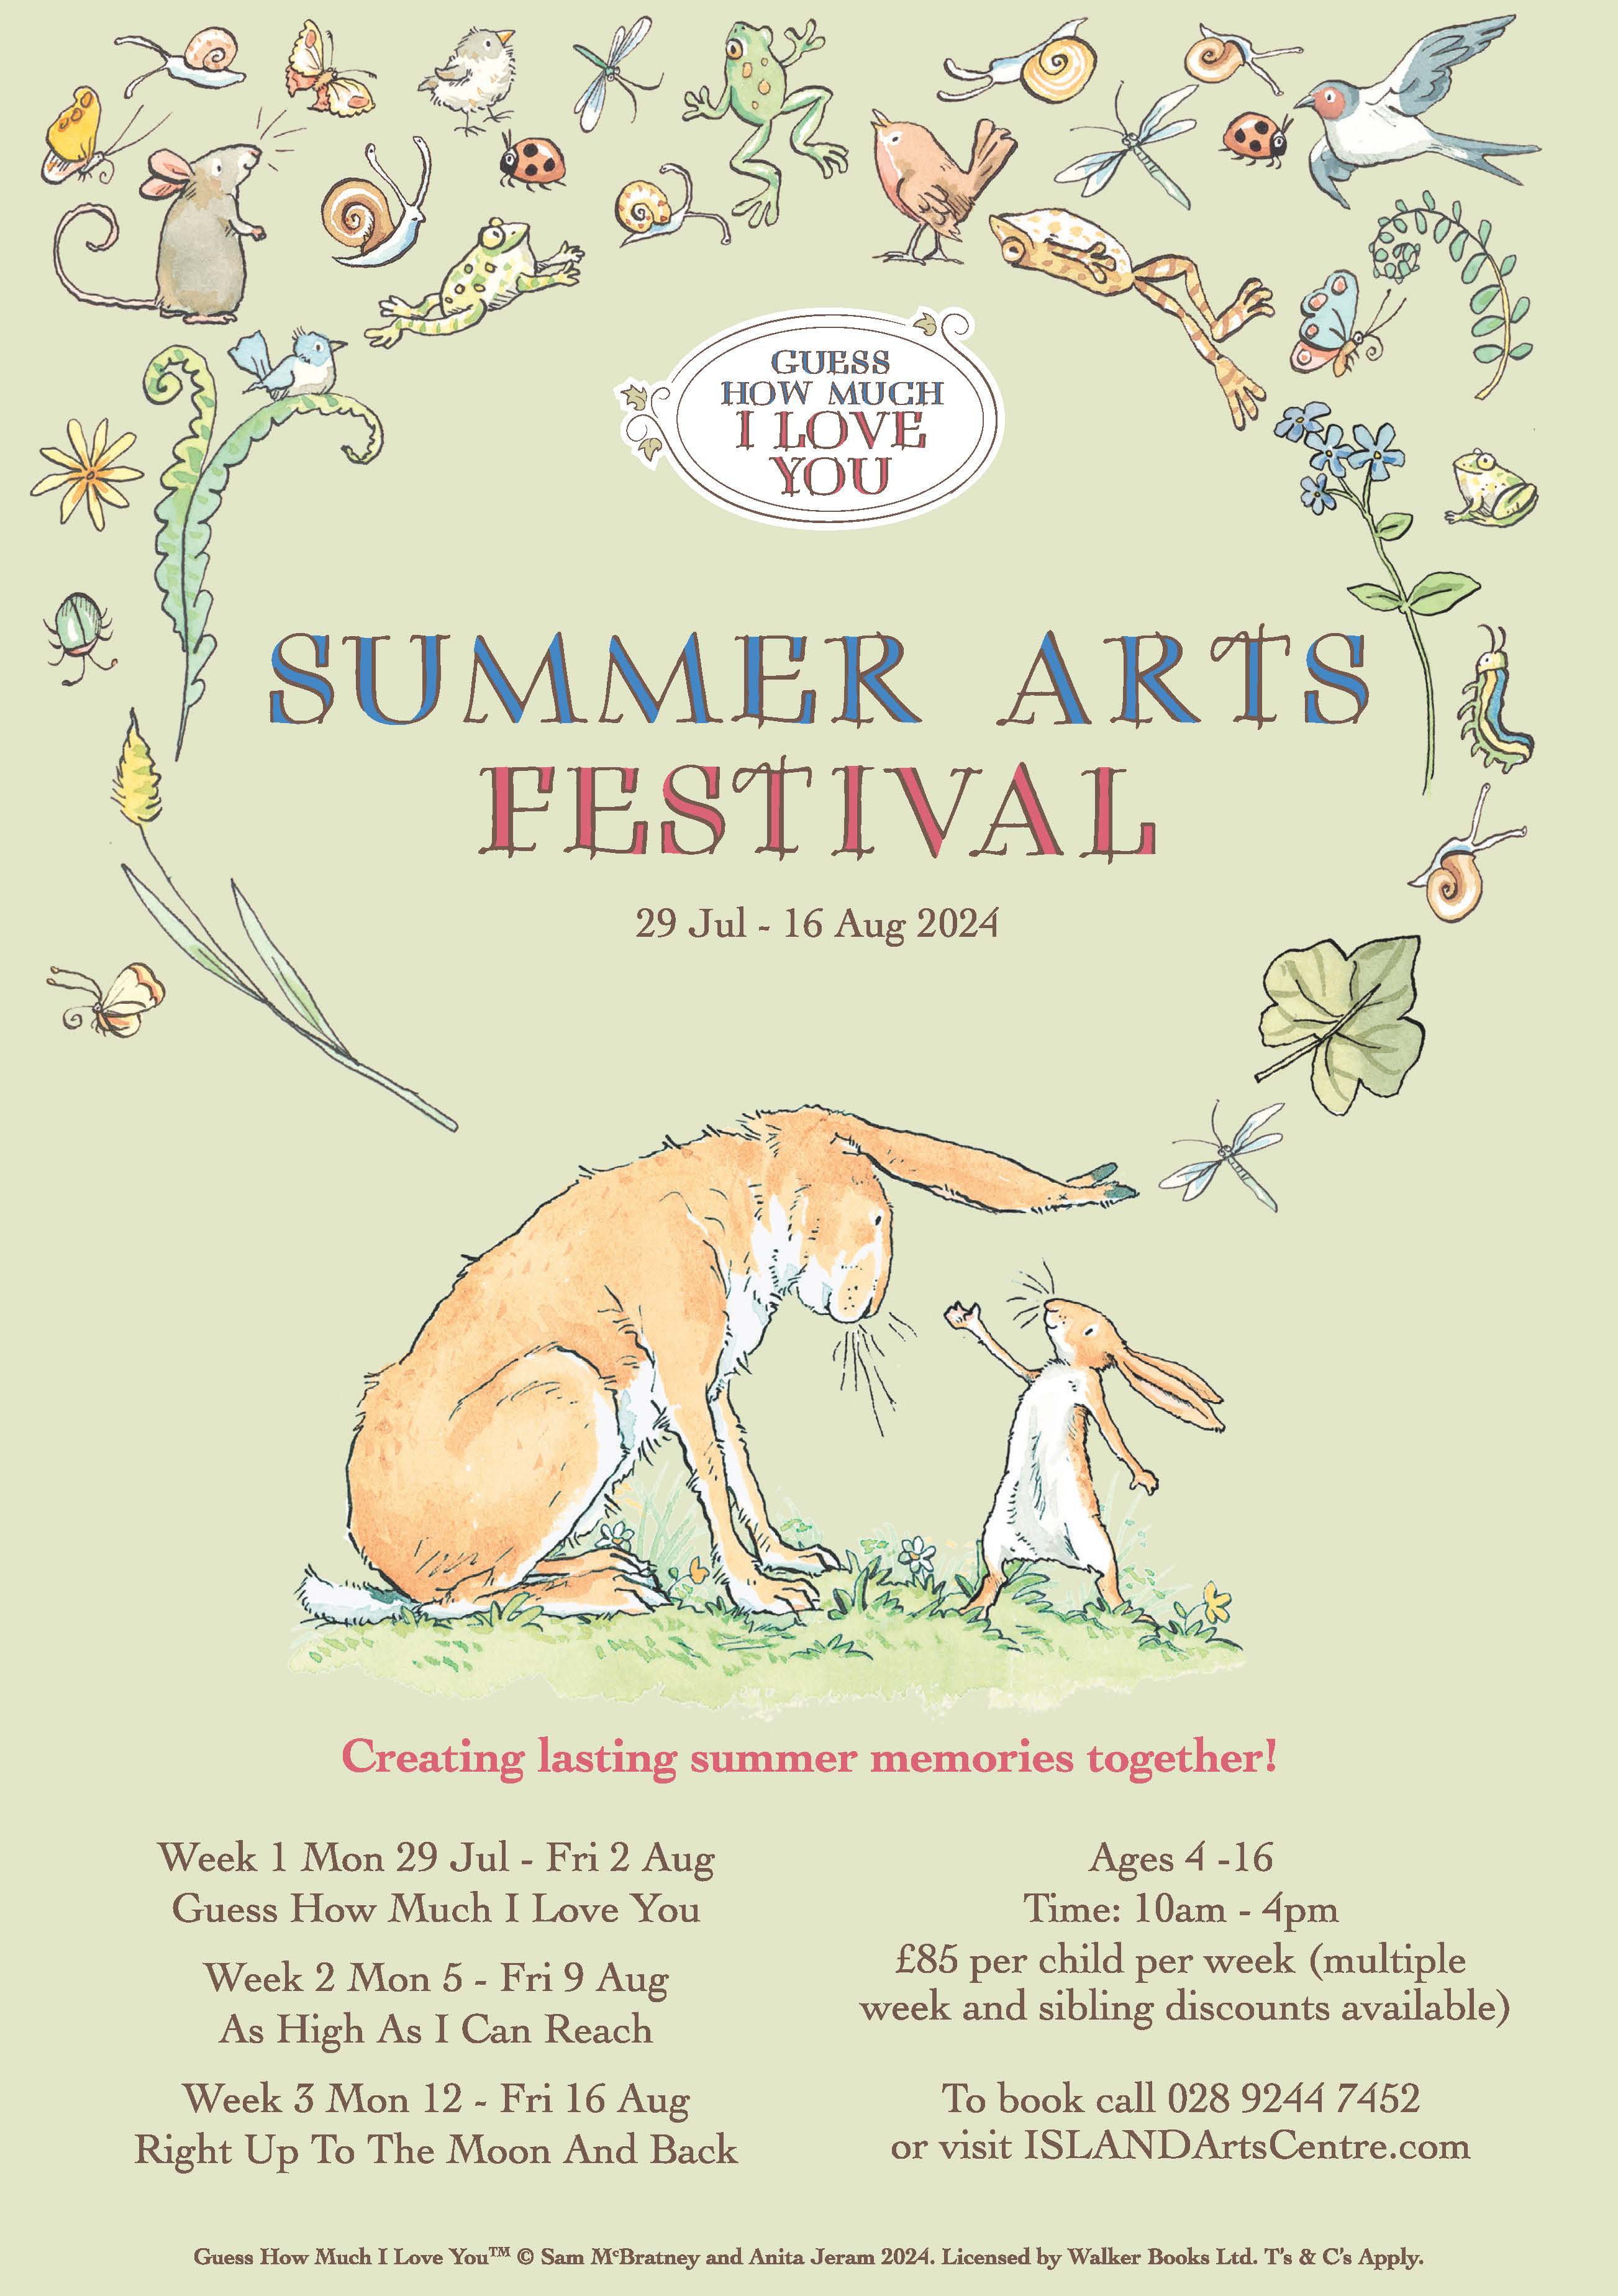 Places are filling up fast for the ISLAND Summer Arts Festival!